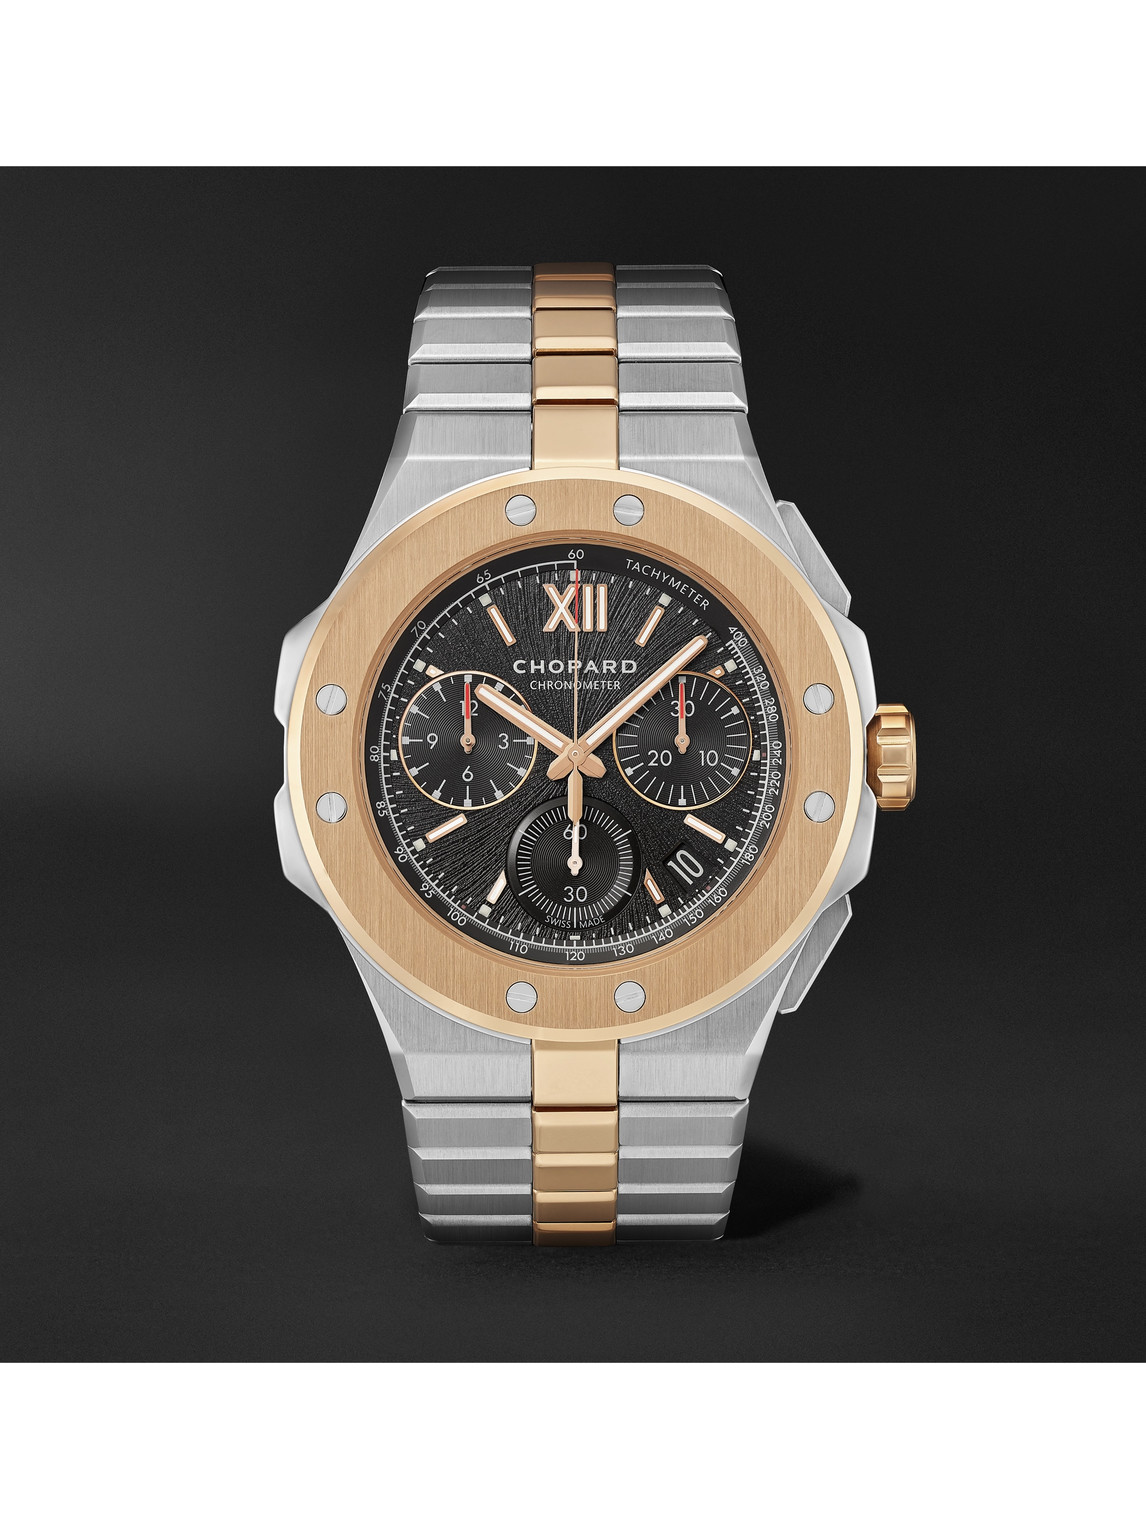 Chopard Alpine Eagle Xl Chrono Automatic 44mm Lucent Steel And 18-karat Rose Gold Watch, Ref. No. 298609-600 In Black